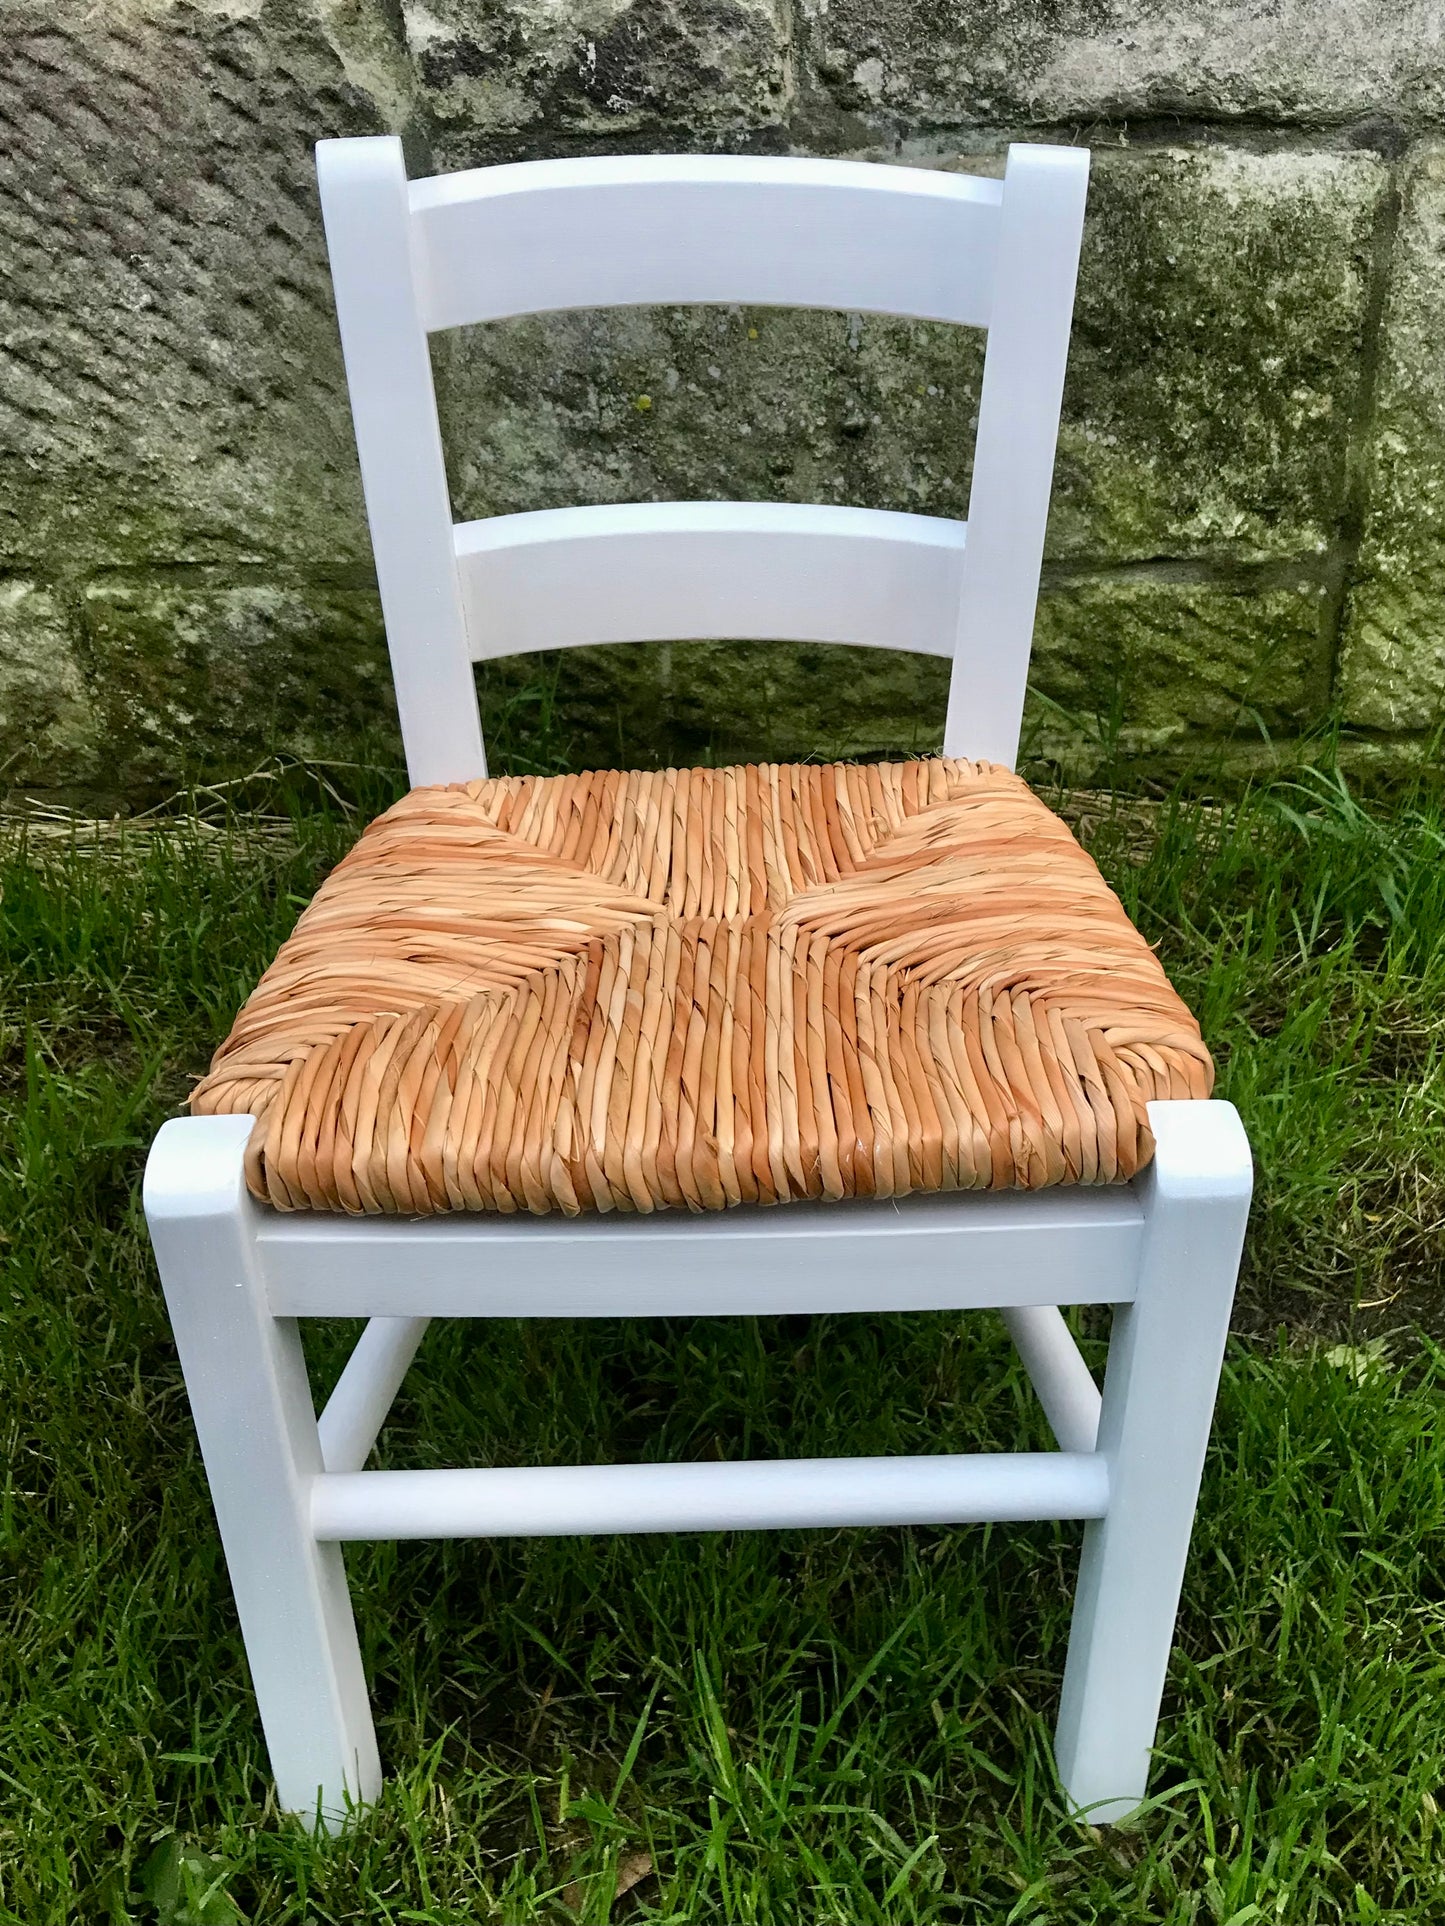 Plain wooden rush seat children's chair available raw to be painted by you or hand painted from the colour chart provided.